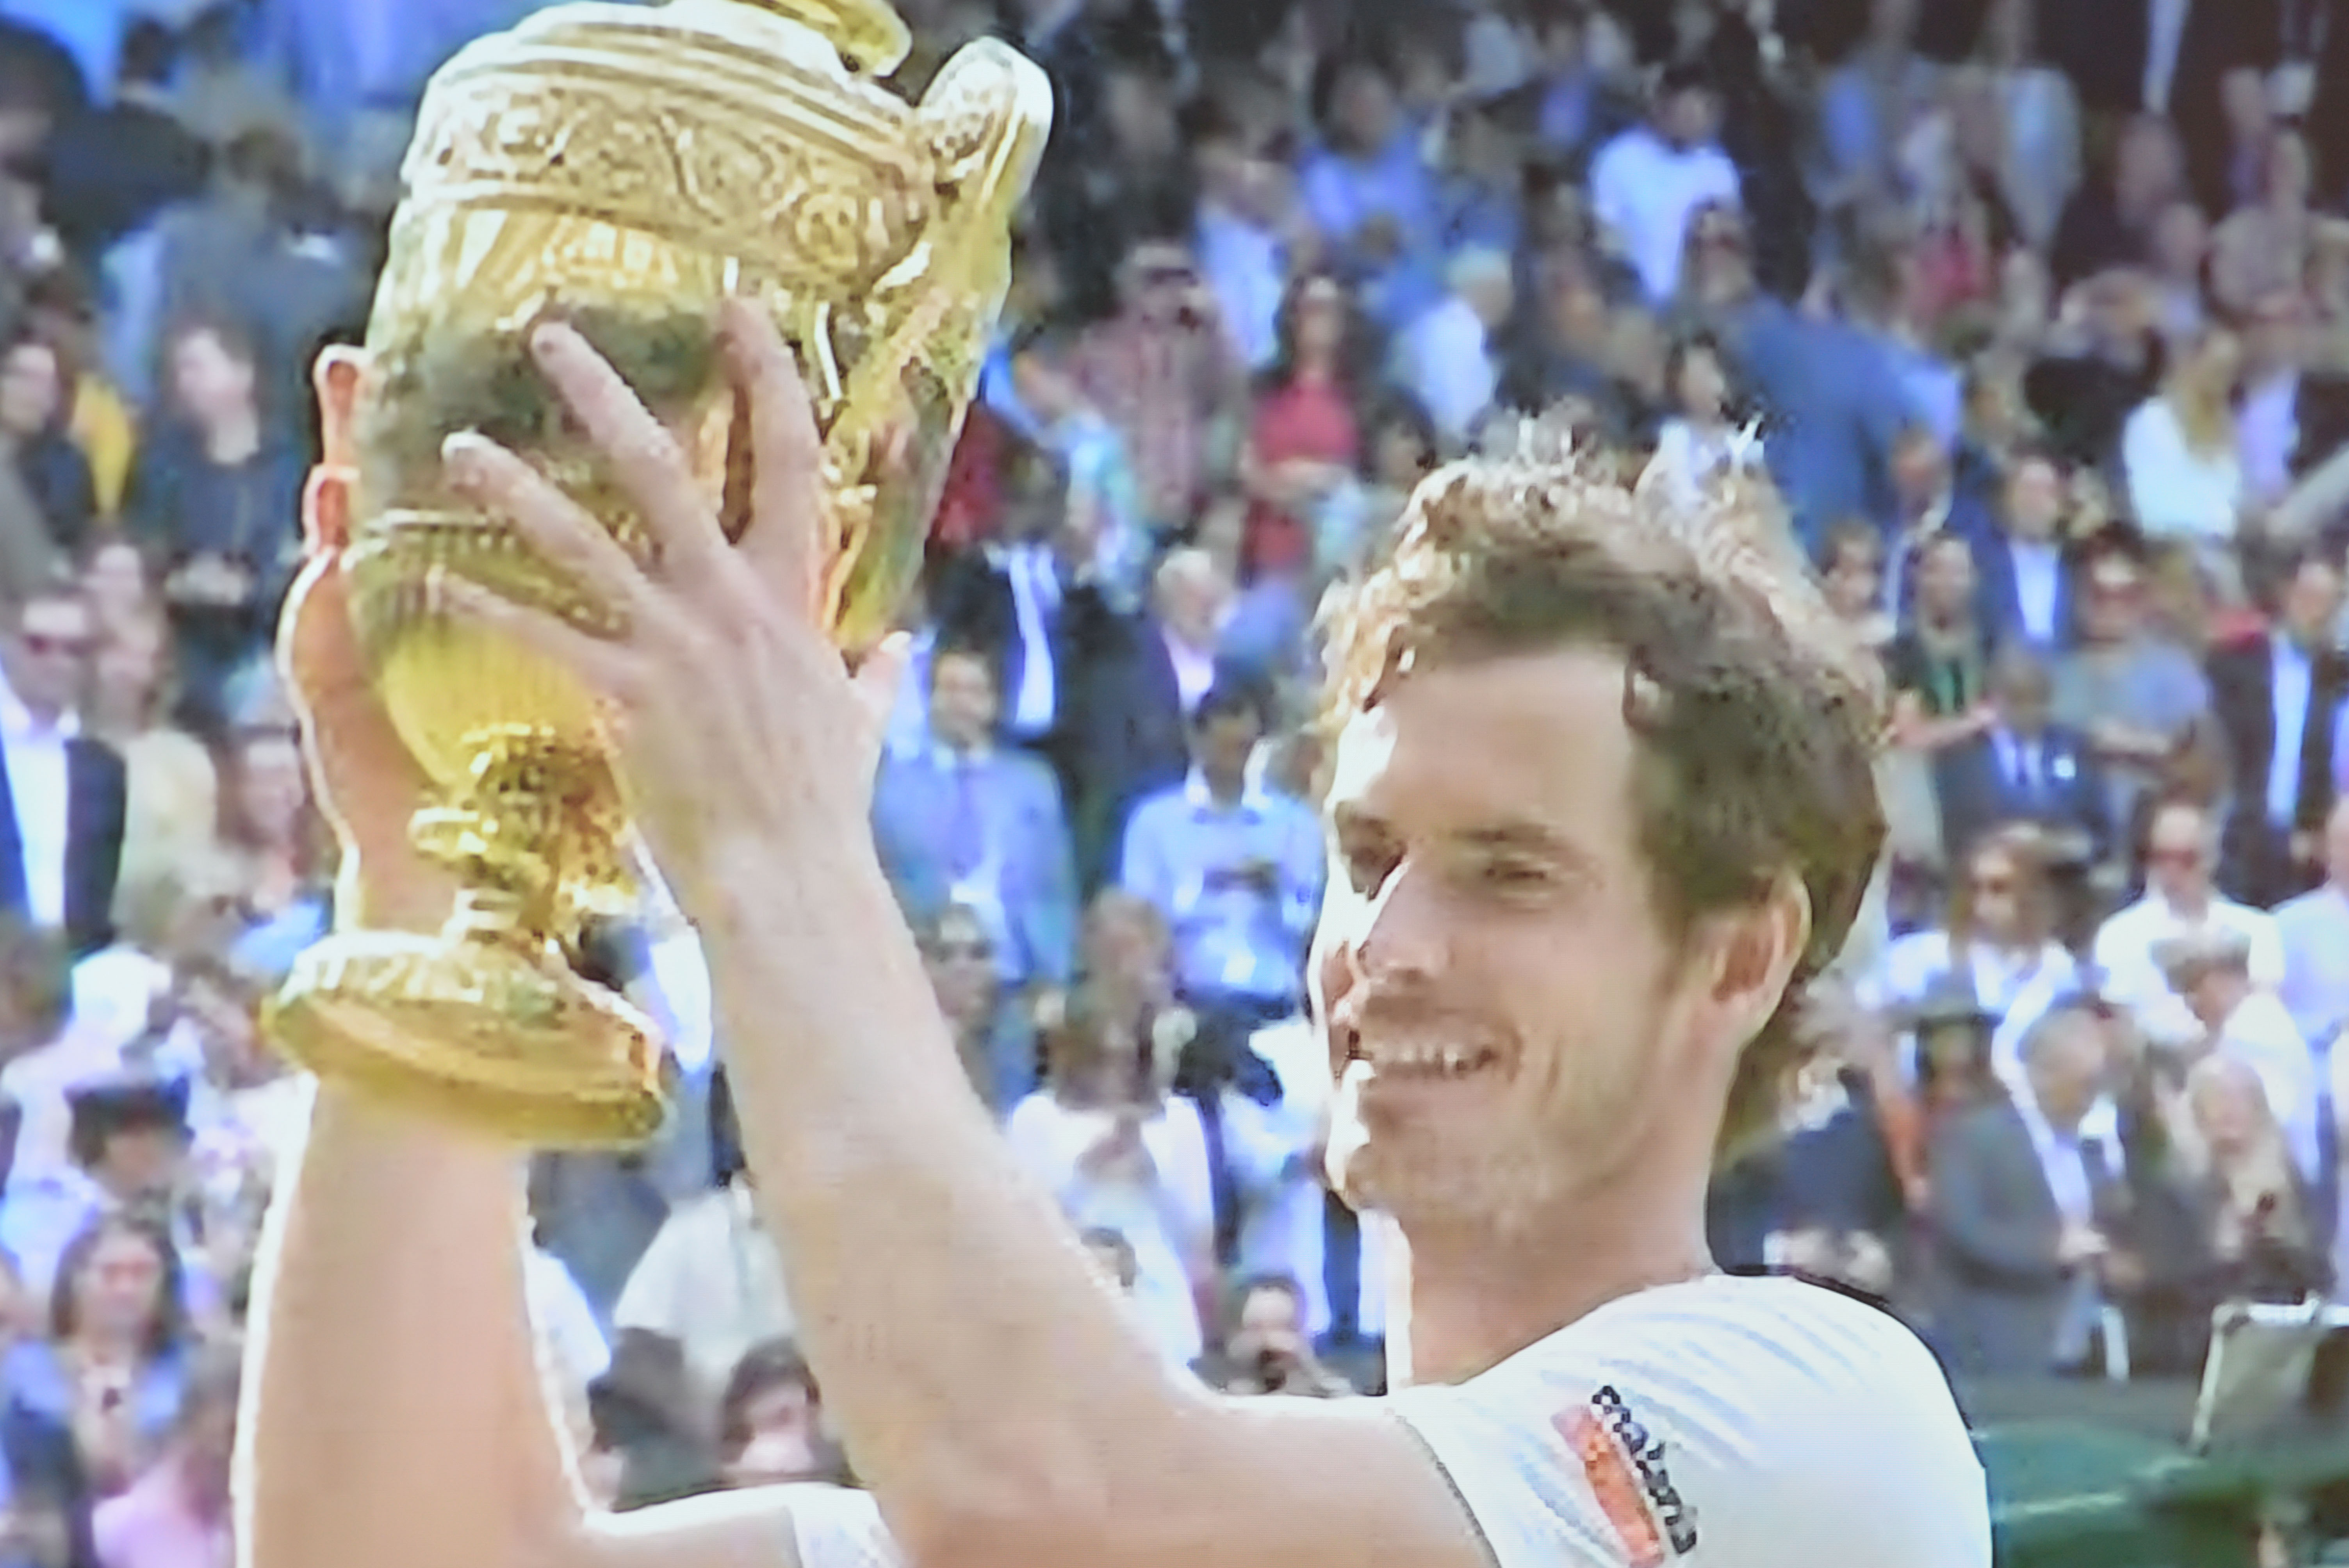 Andy with trophy